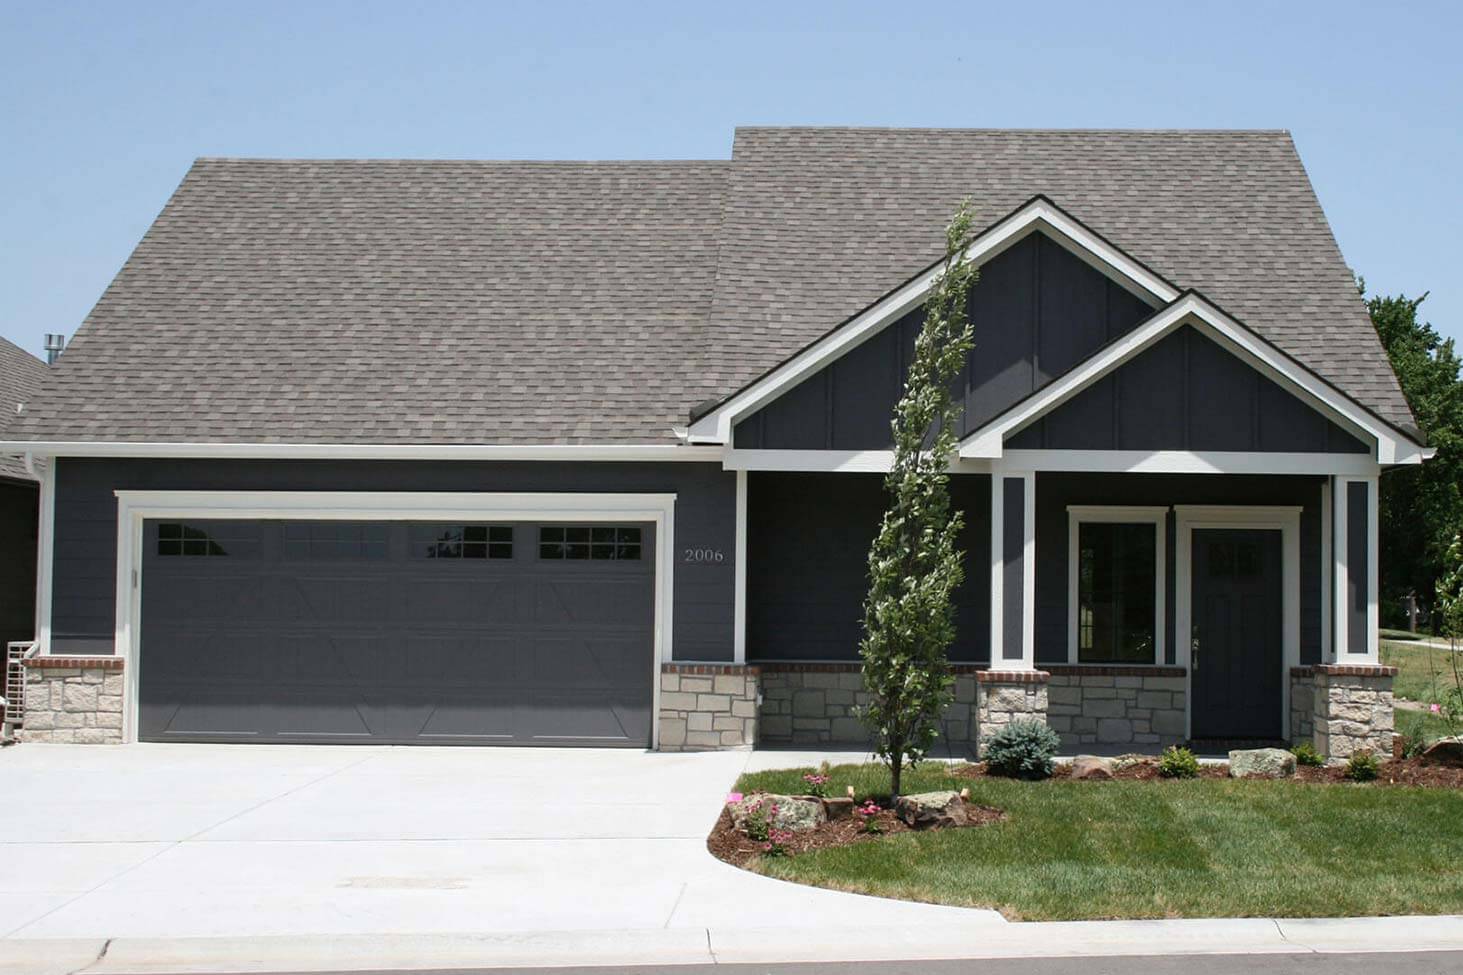 The Porter plan model home. Front view of home with dark blue exterior.